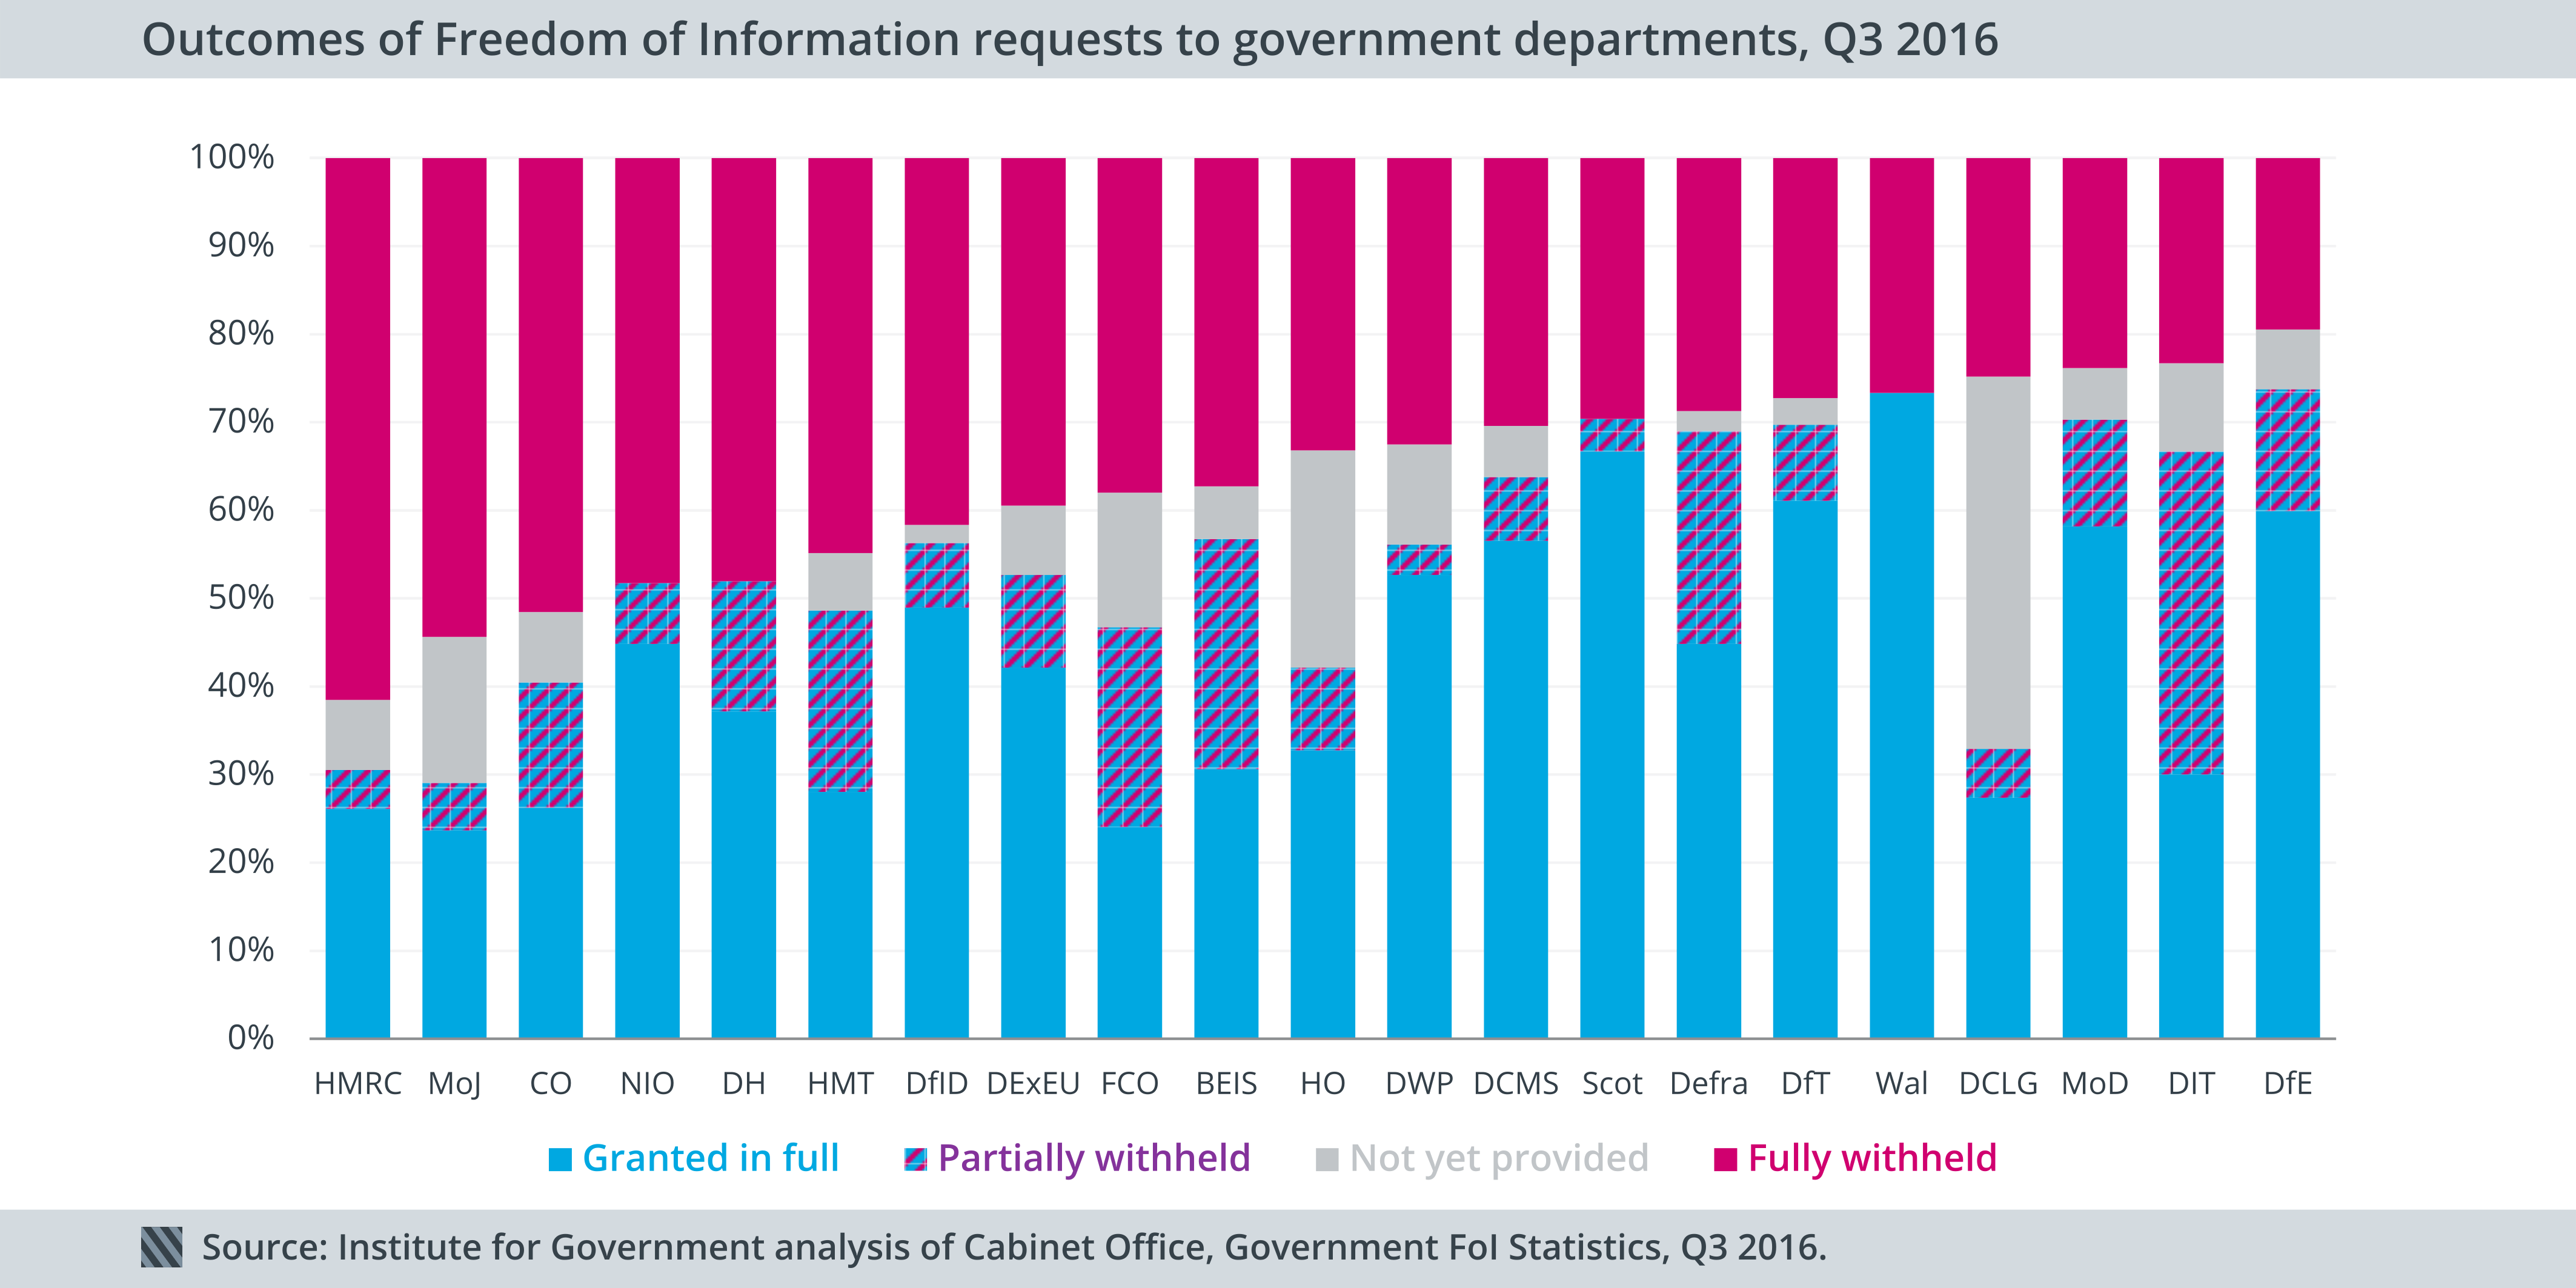 Freedom of Information - outcome of requests by department, Q3 2016